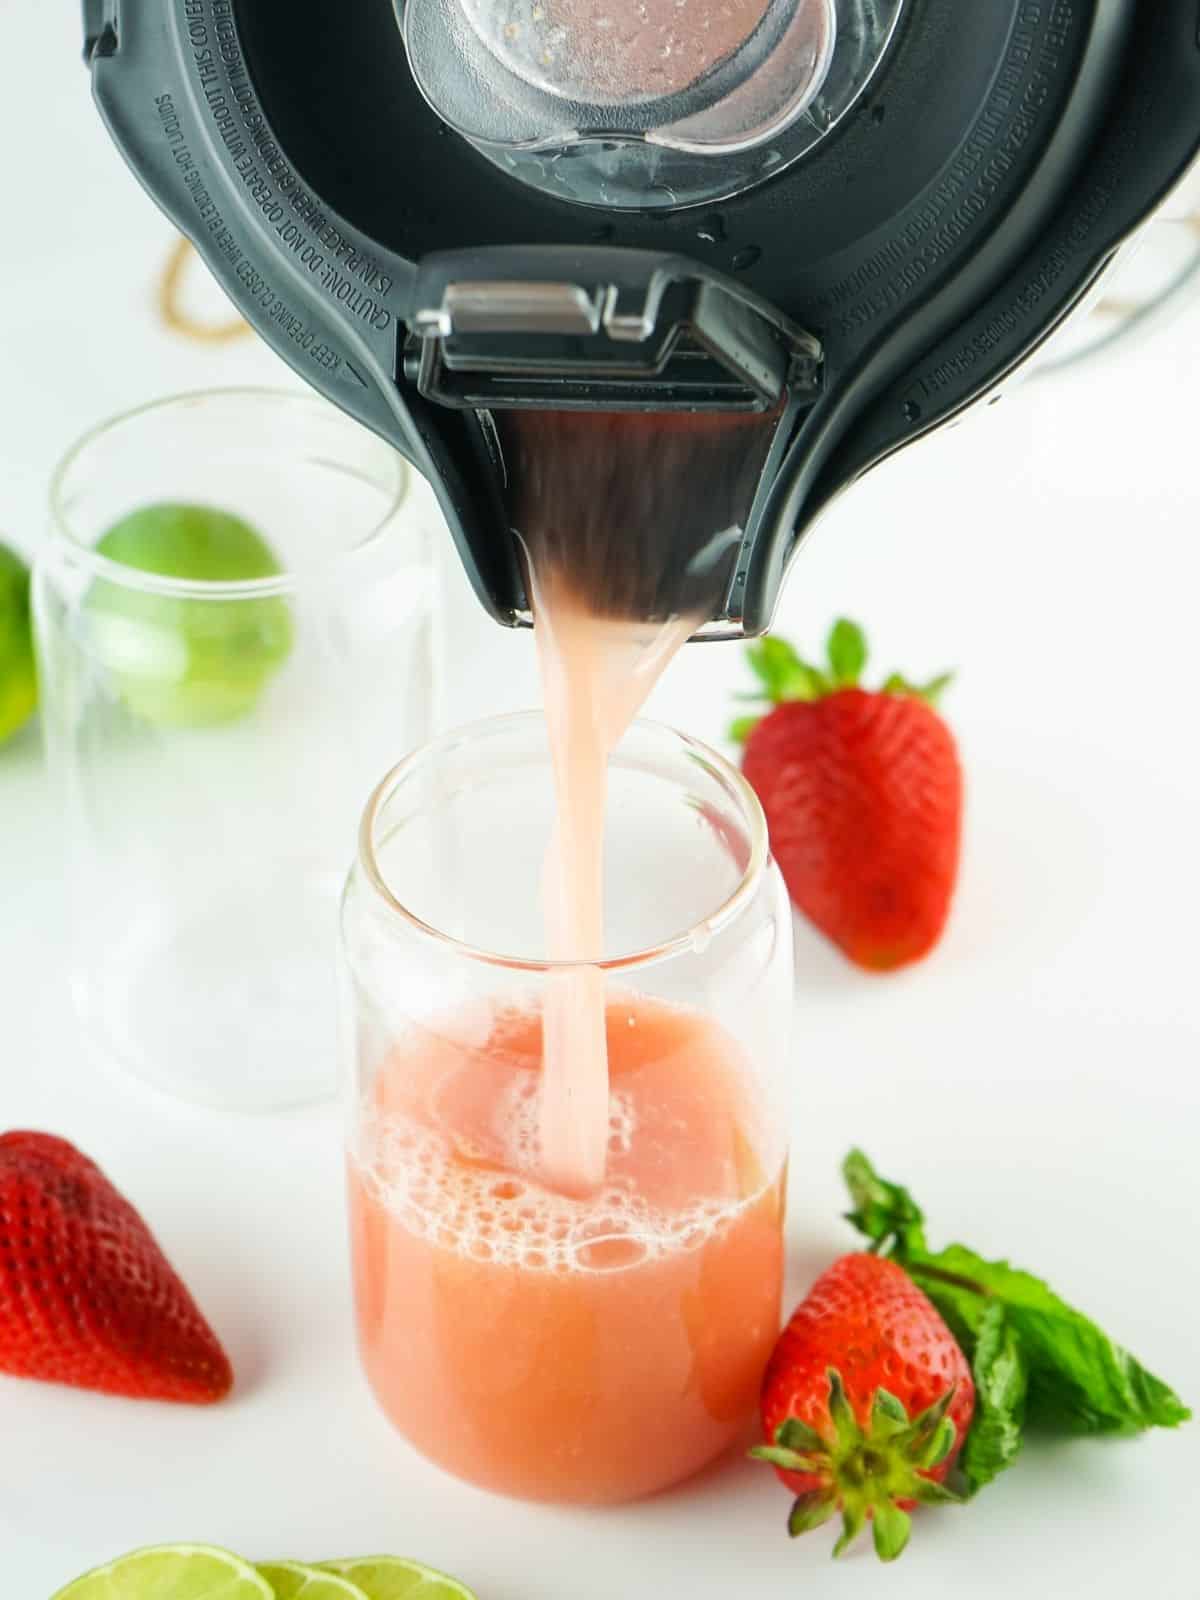 pour freshly blended juice into glass.